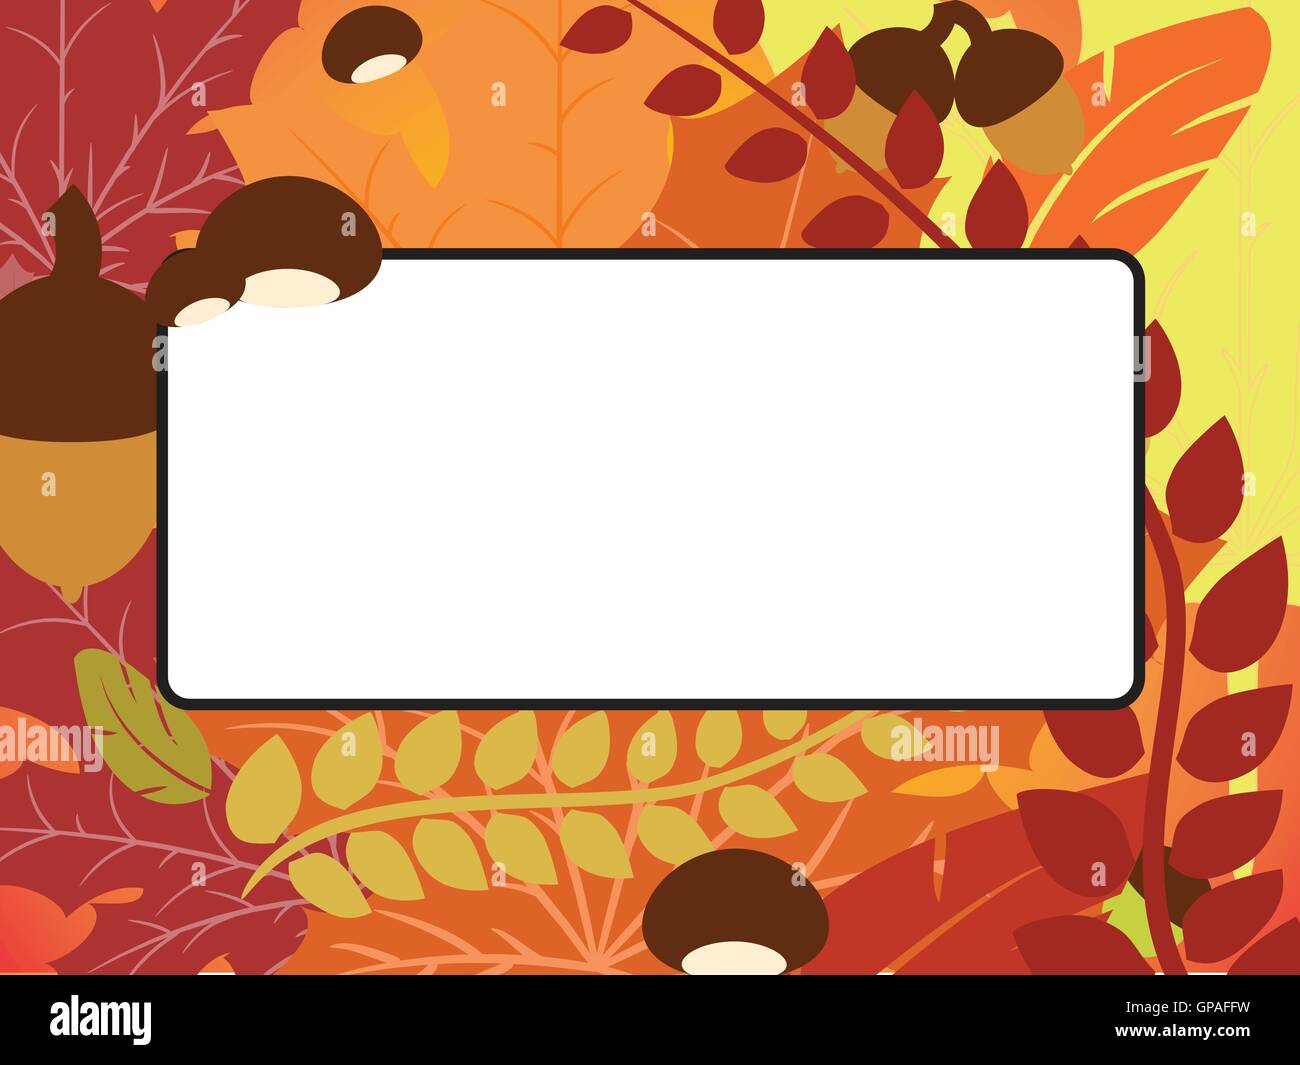 Fall leaves, acorn and chestnut frame with blank space background. Stock Vector